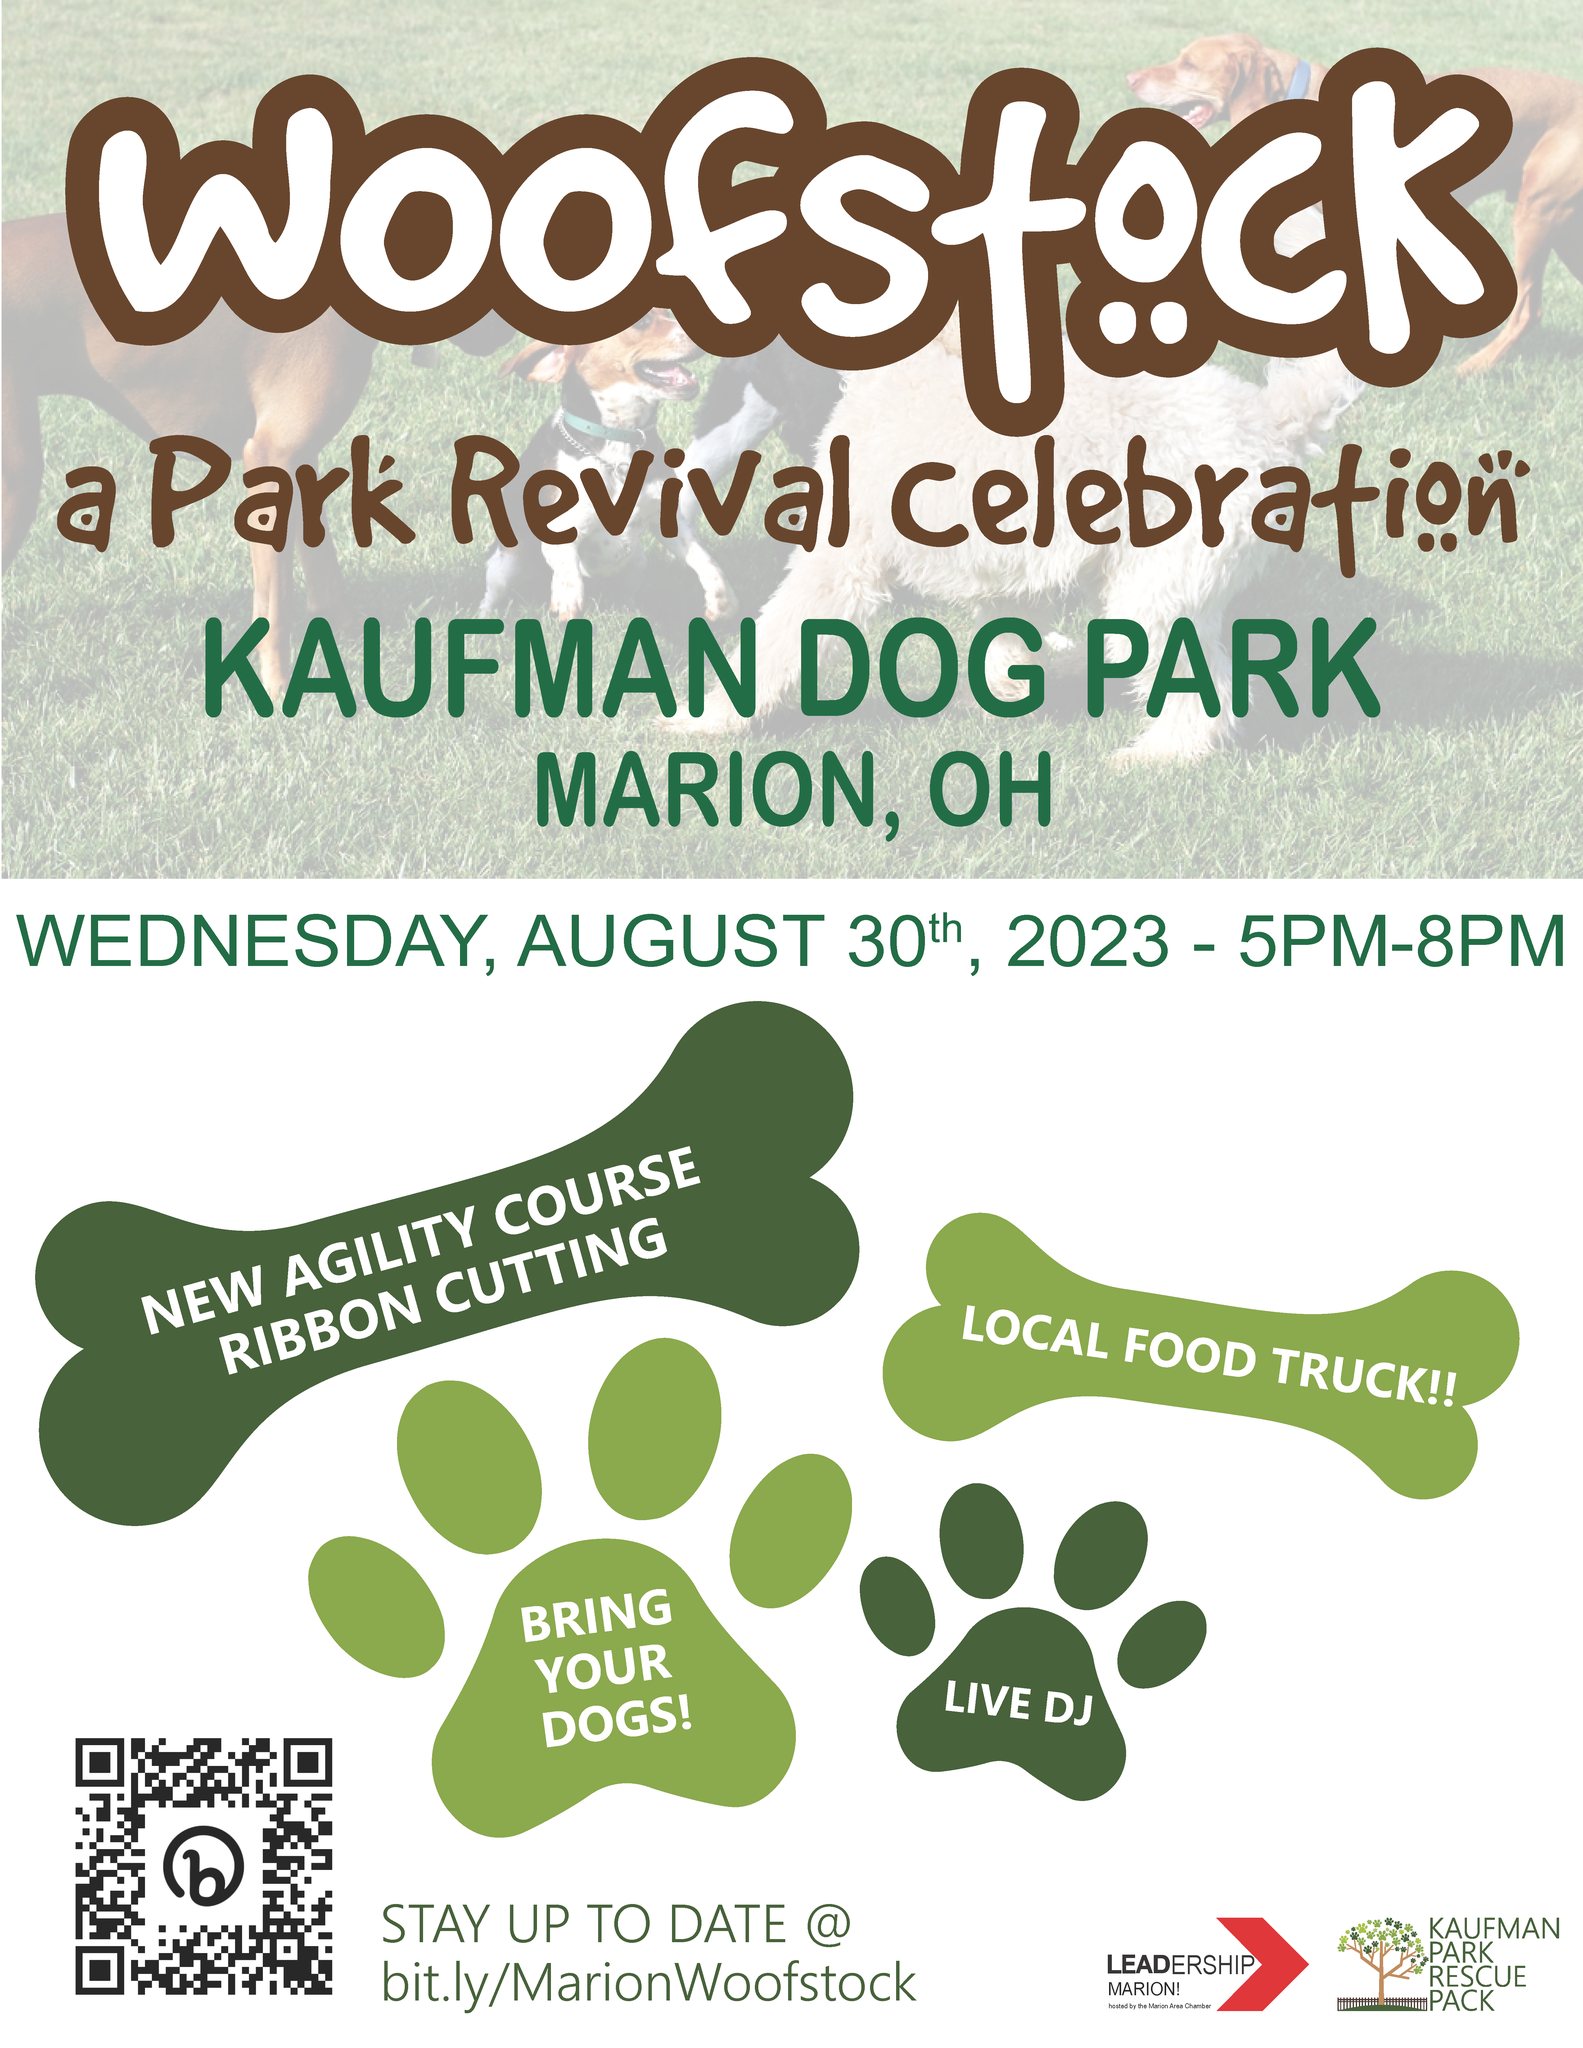 Poster describing an event to celebrate the revival of the Kaufman Dog Park. Paw prints and dog bones pictured.